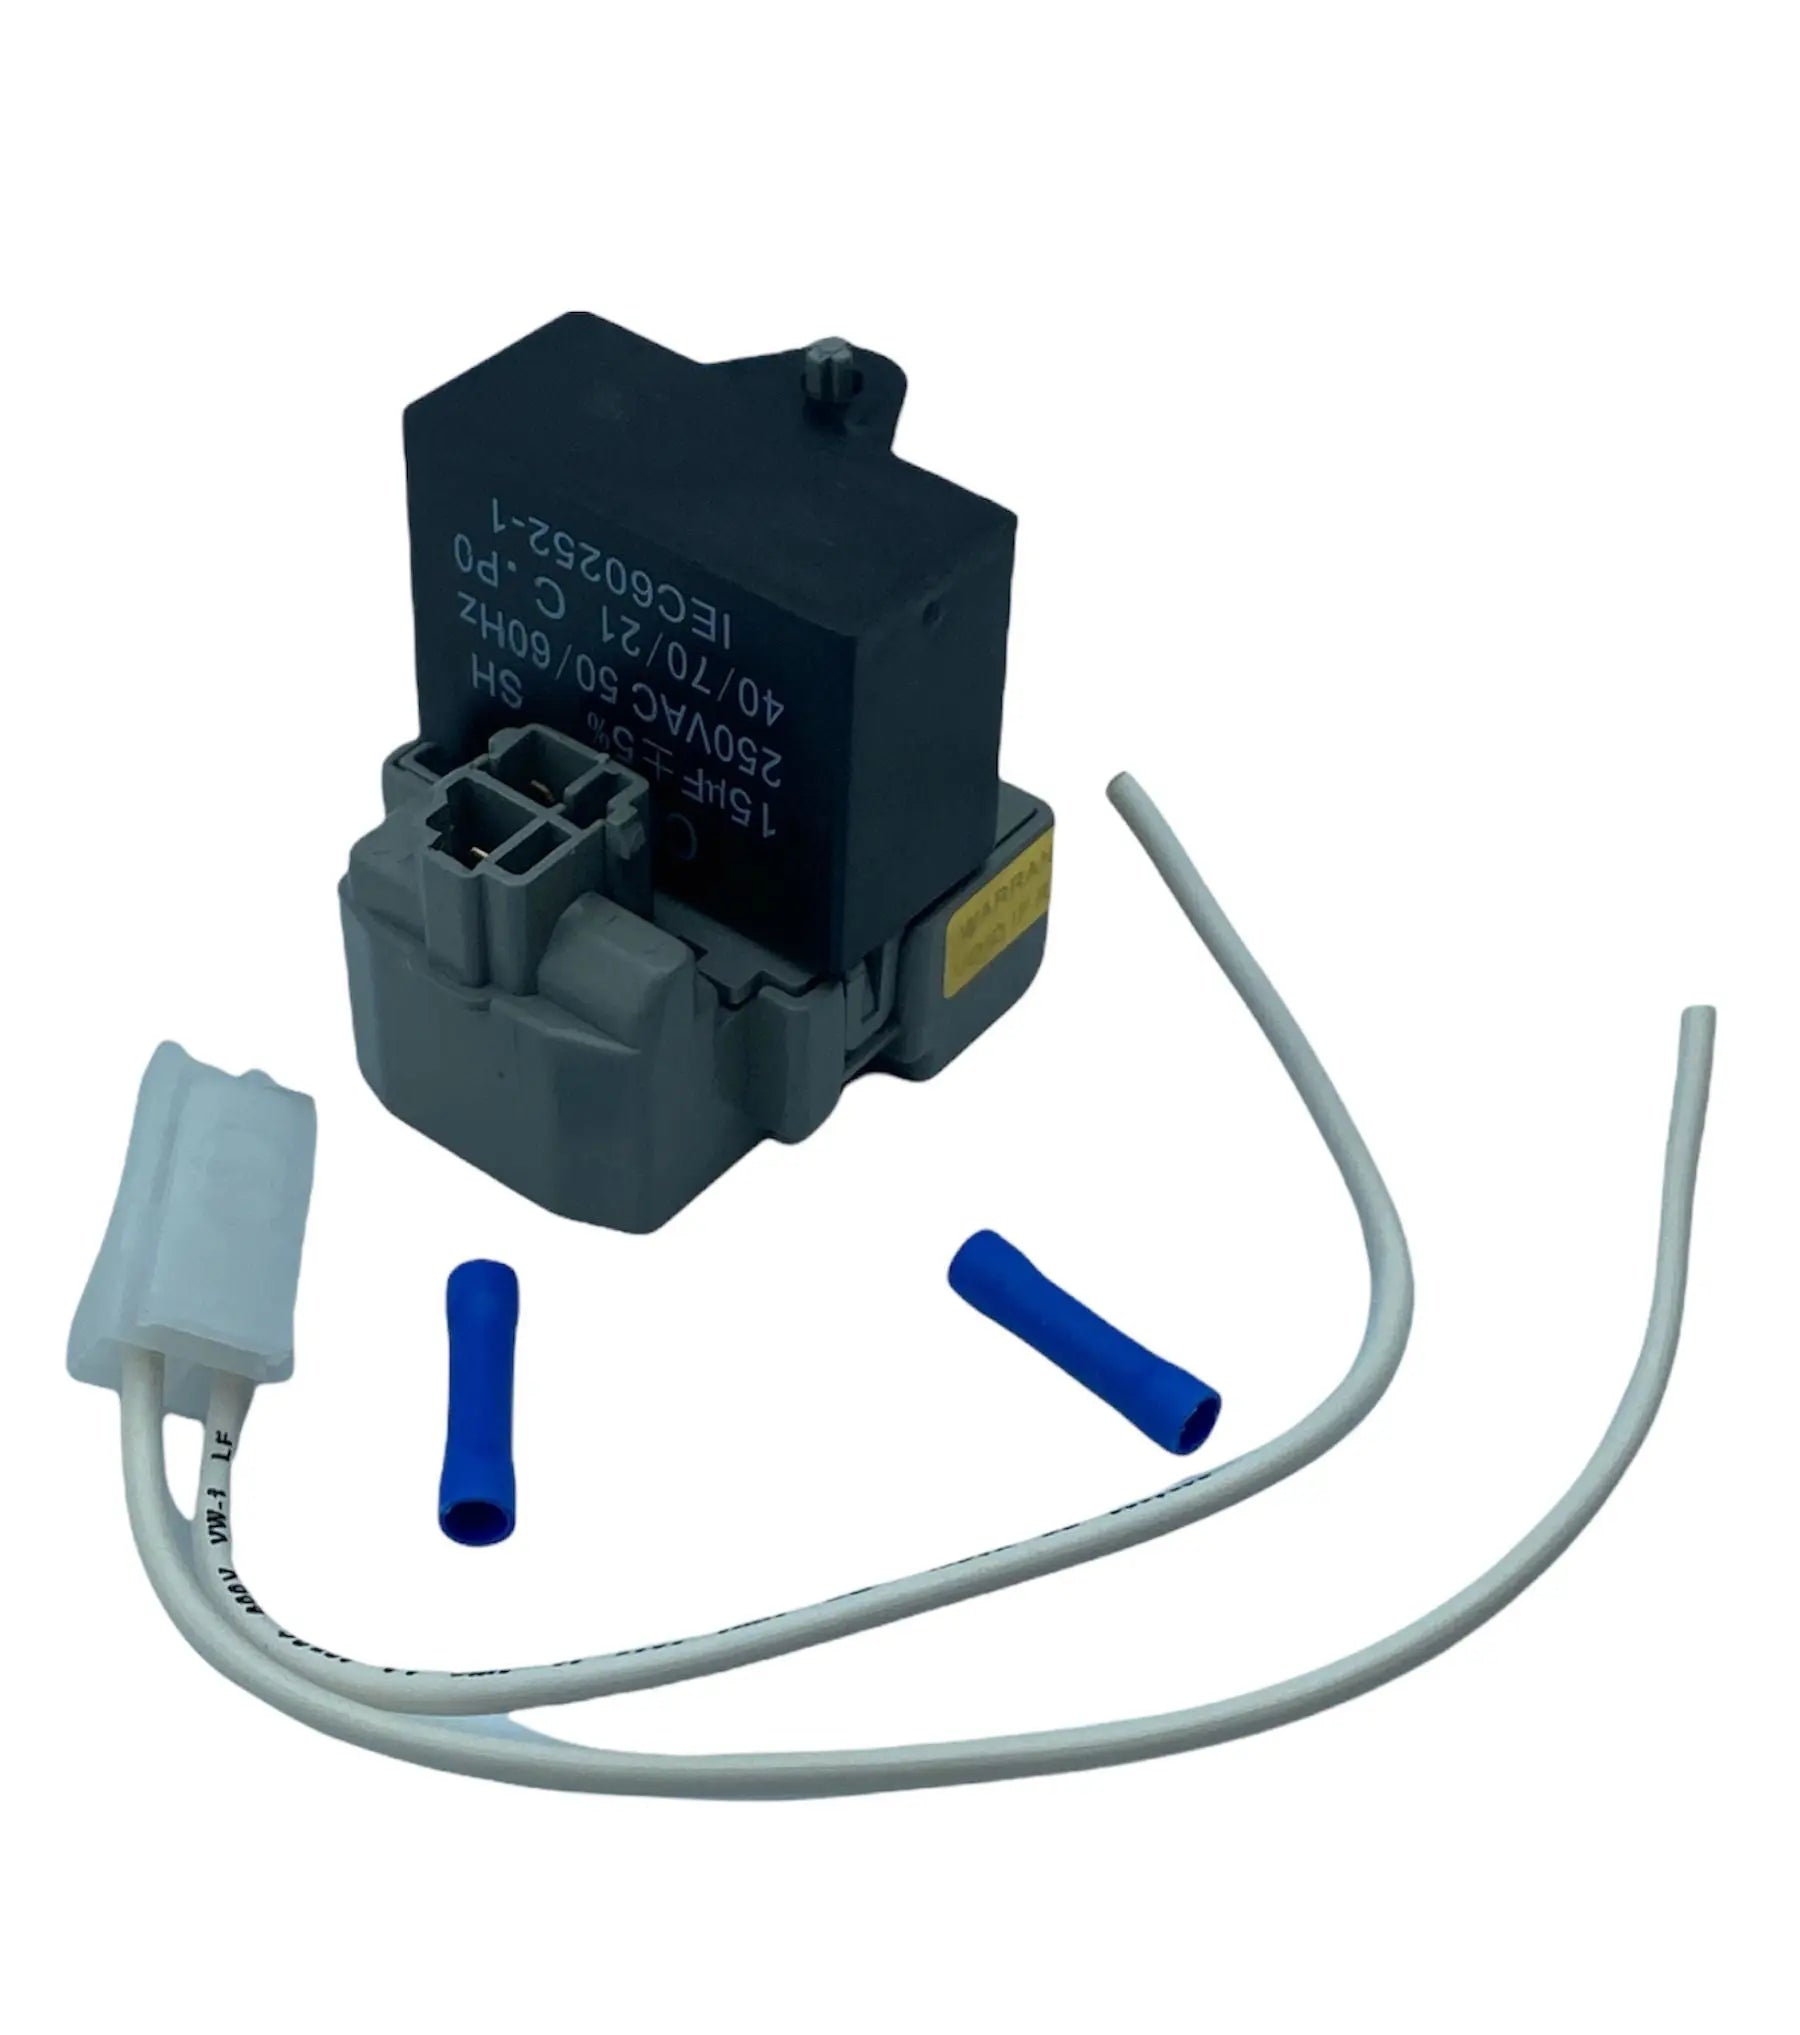 G.E Refrigerator Start Device Kit - WR08X10097 or WR08X10112,  REPLACES: 1476768 AP4412995 PS2354411 EAP2354411 PD00036771 INVERTEC